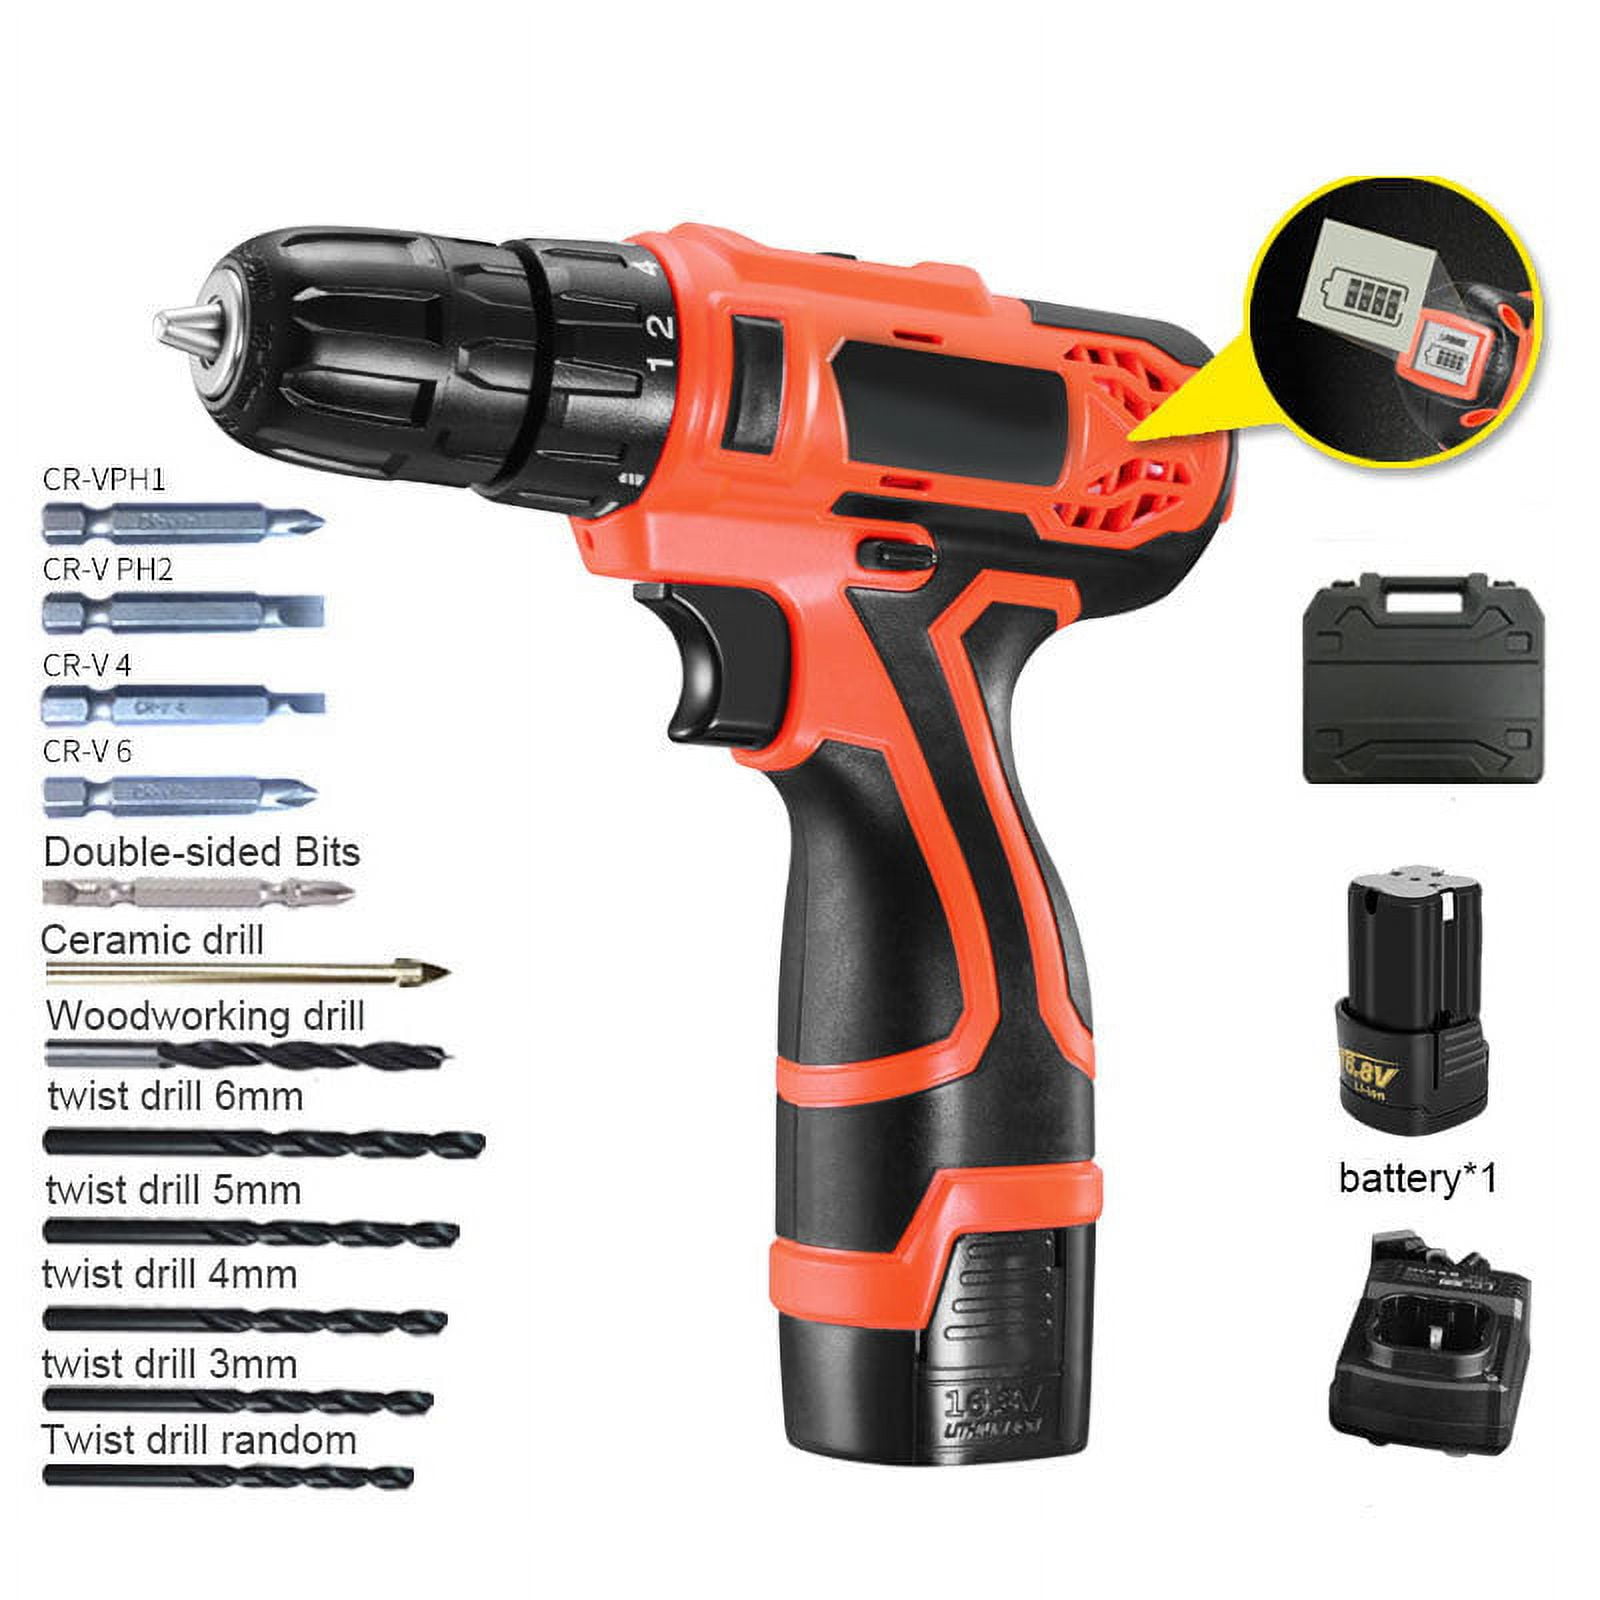 12V 16.8V 21V Cordless Drill Power Tools Wireless Drills Rechargeable Drill  Set for Electric Screwdriver Battery Driller Tool